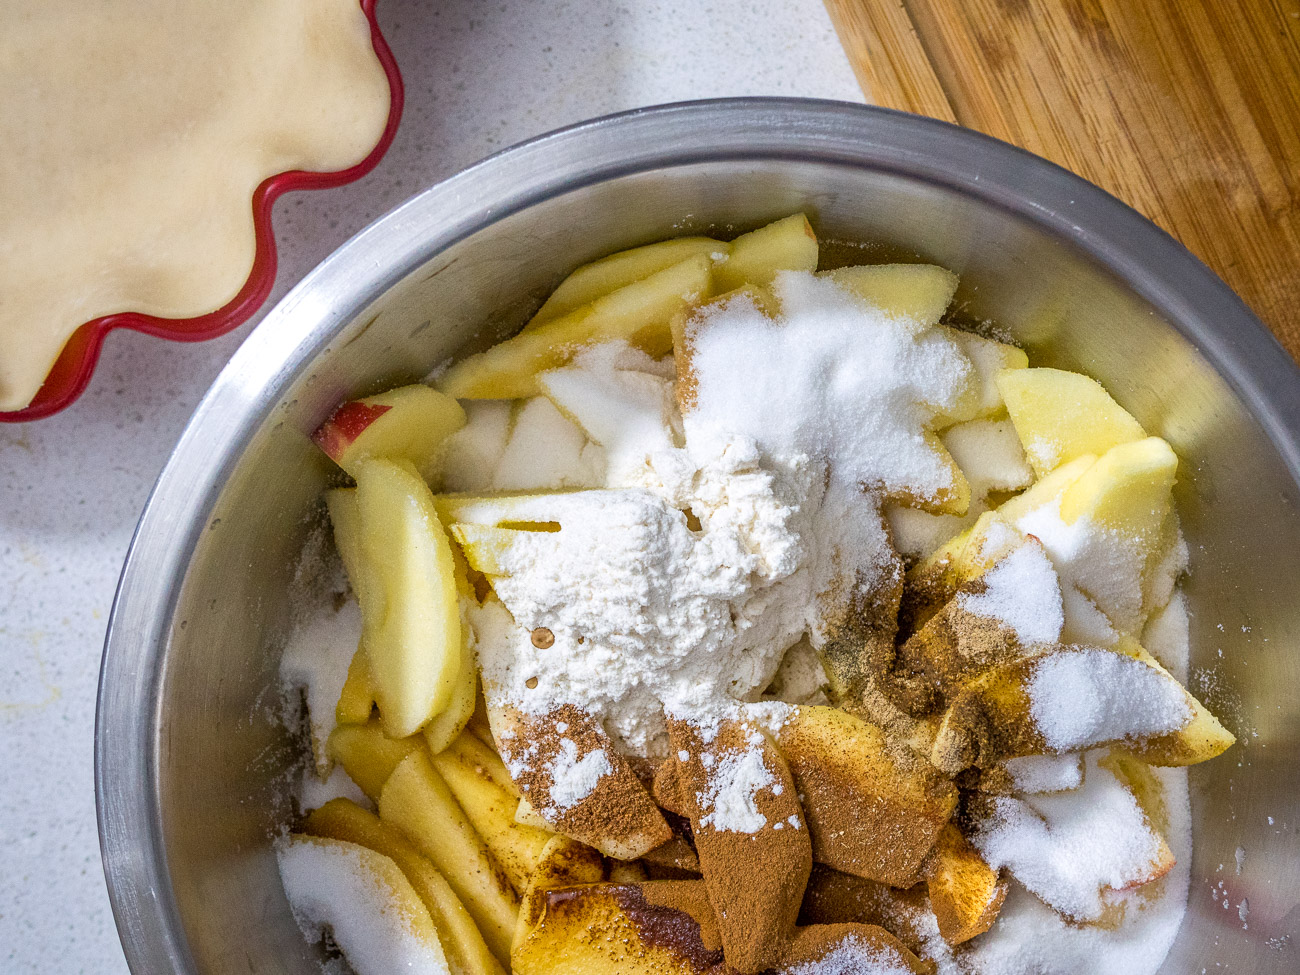 Stir apples, lemon juice, flour, all of the spices, sugar, and vanilla extract together in a large bowl until thoroughly combined. Set aside.